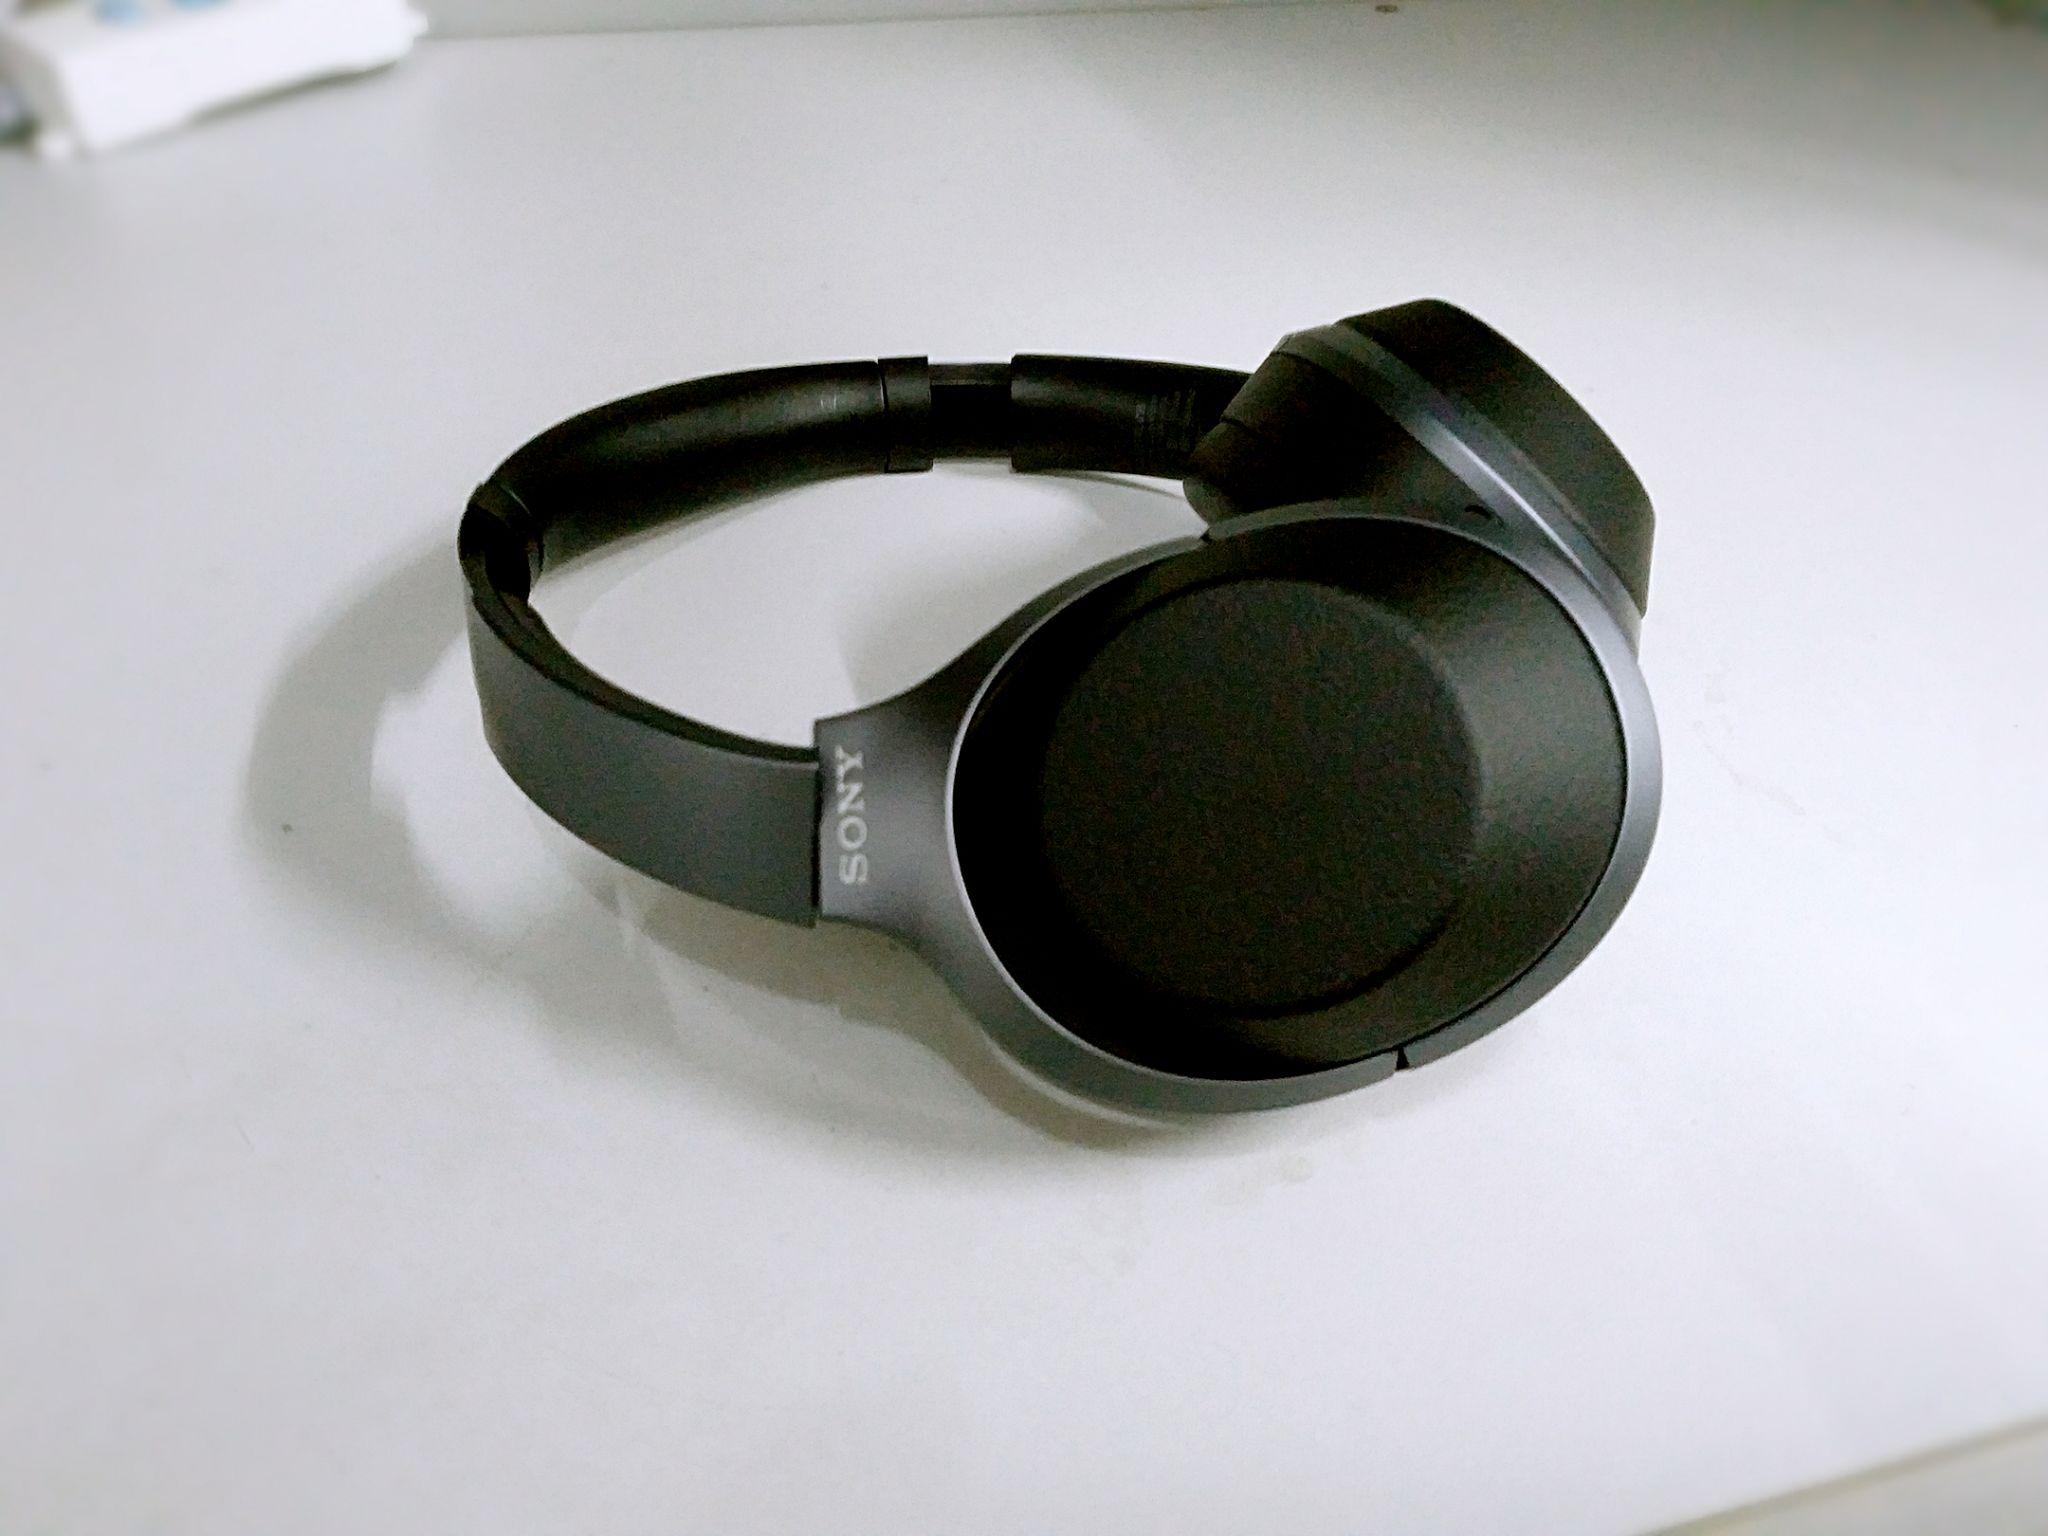 Sony wh-1000xm2和mdr-1000x的区别?或者问